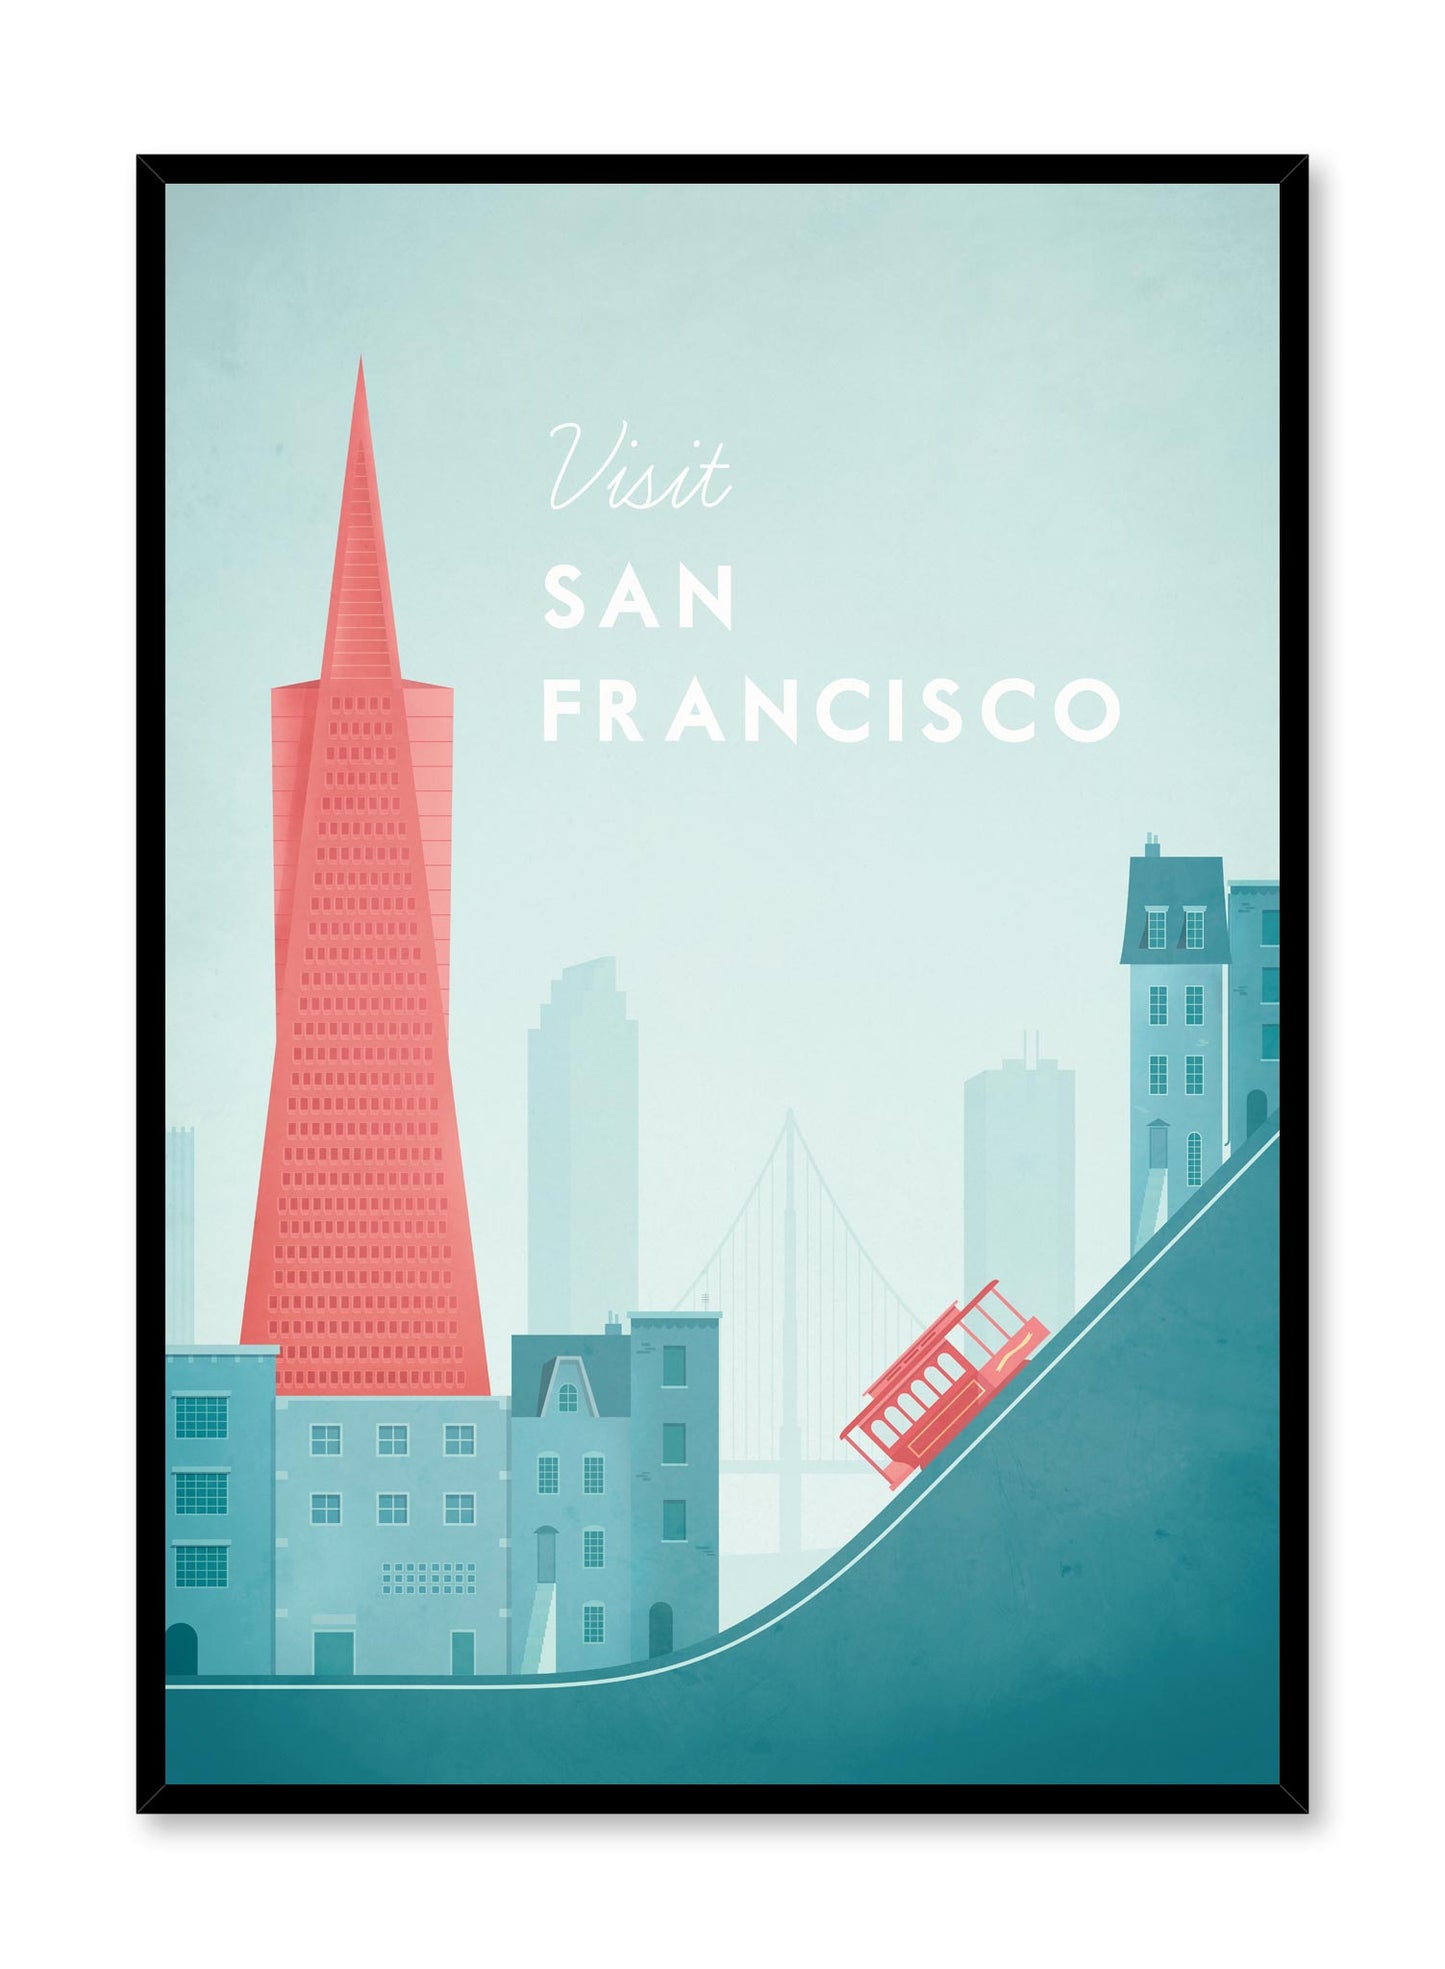 Modern minimalist travel poster by Opposite Wall with illustration of San Francisco